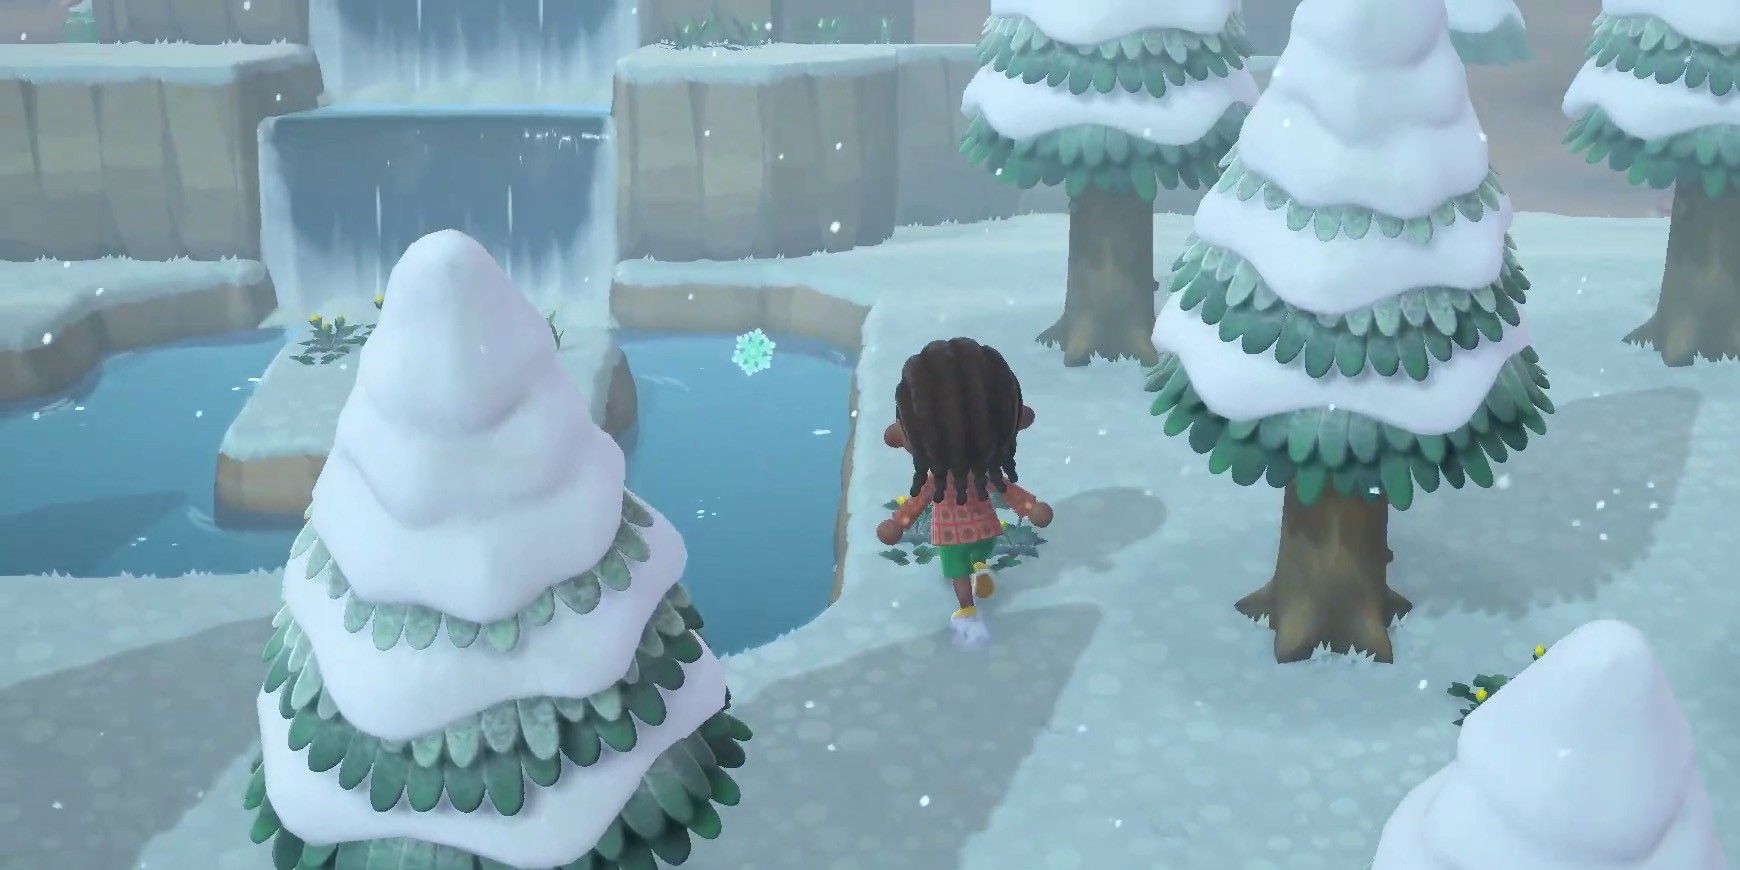 animal crossing new horizons villager on snowy winter island with snowflakes